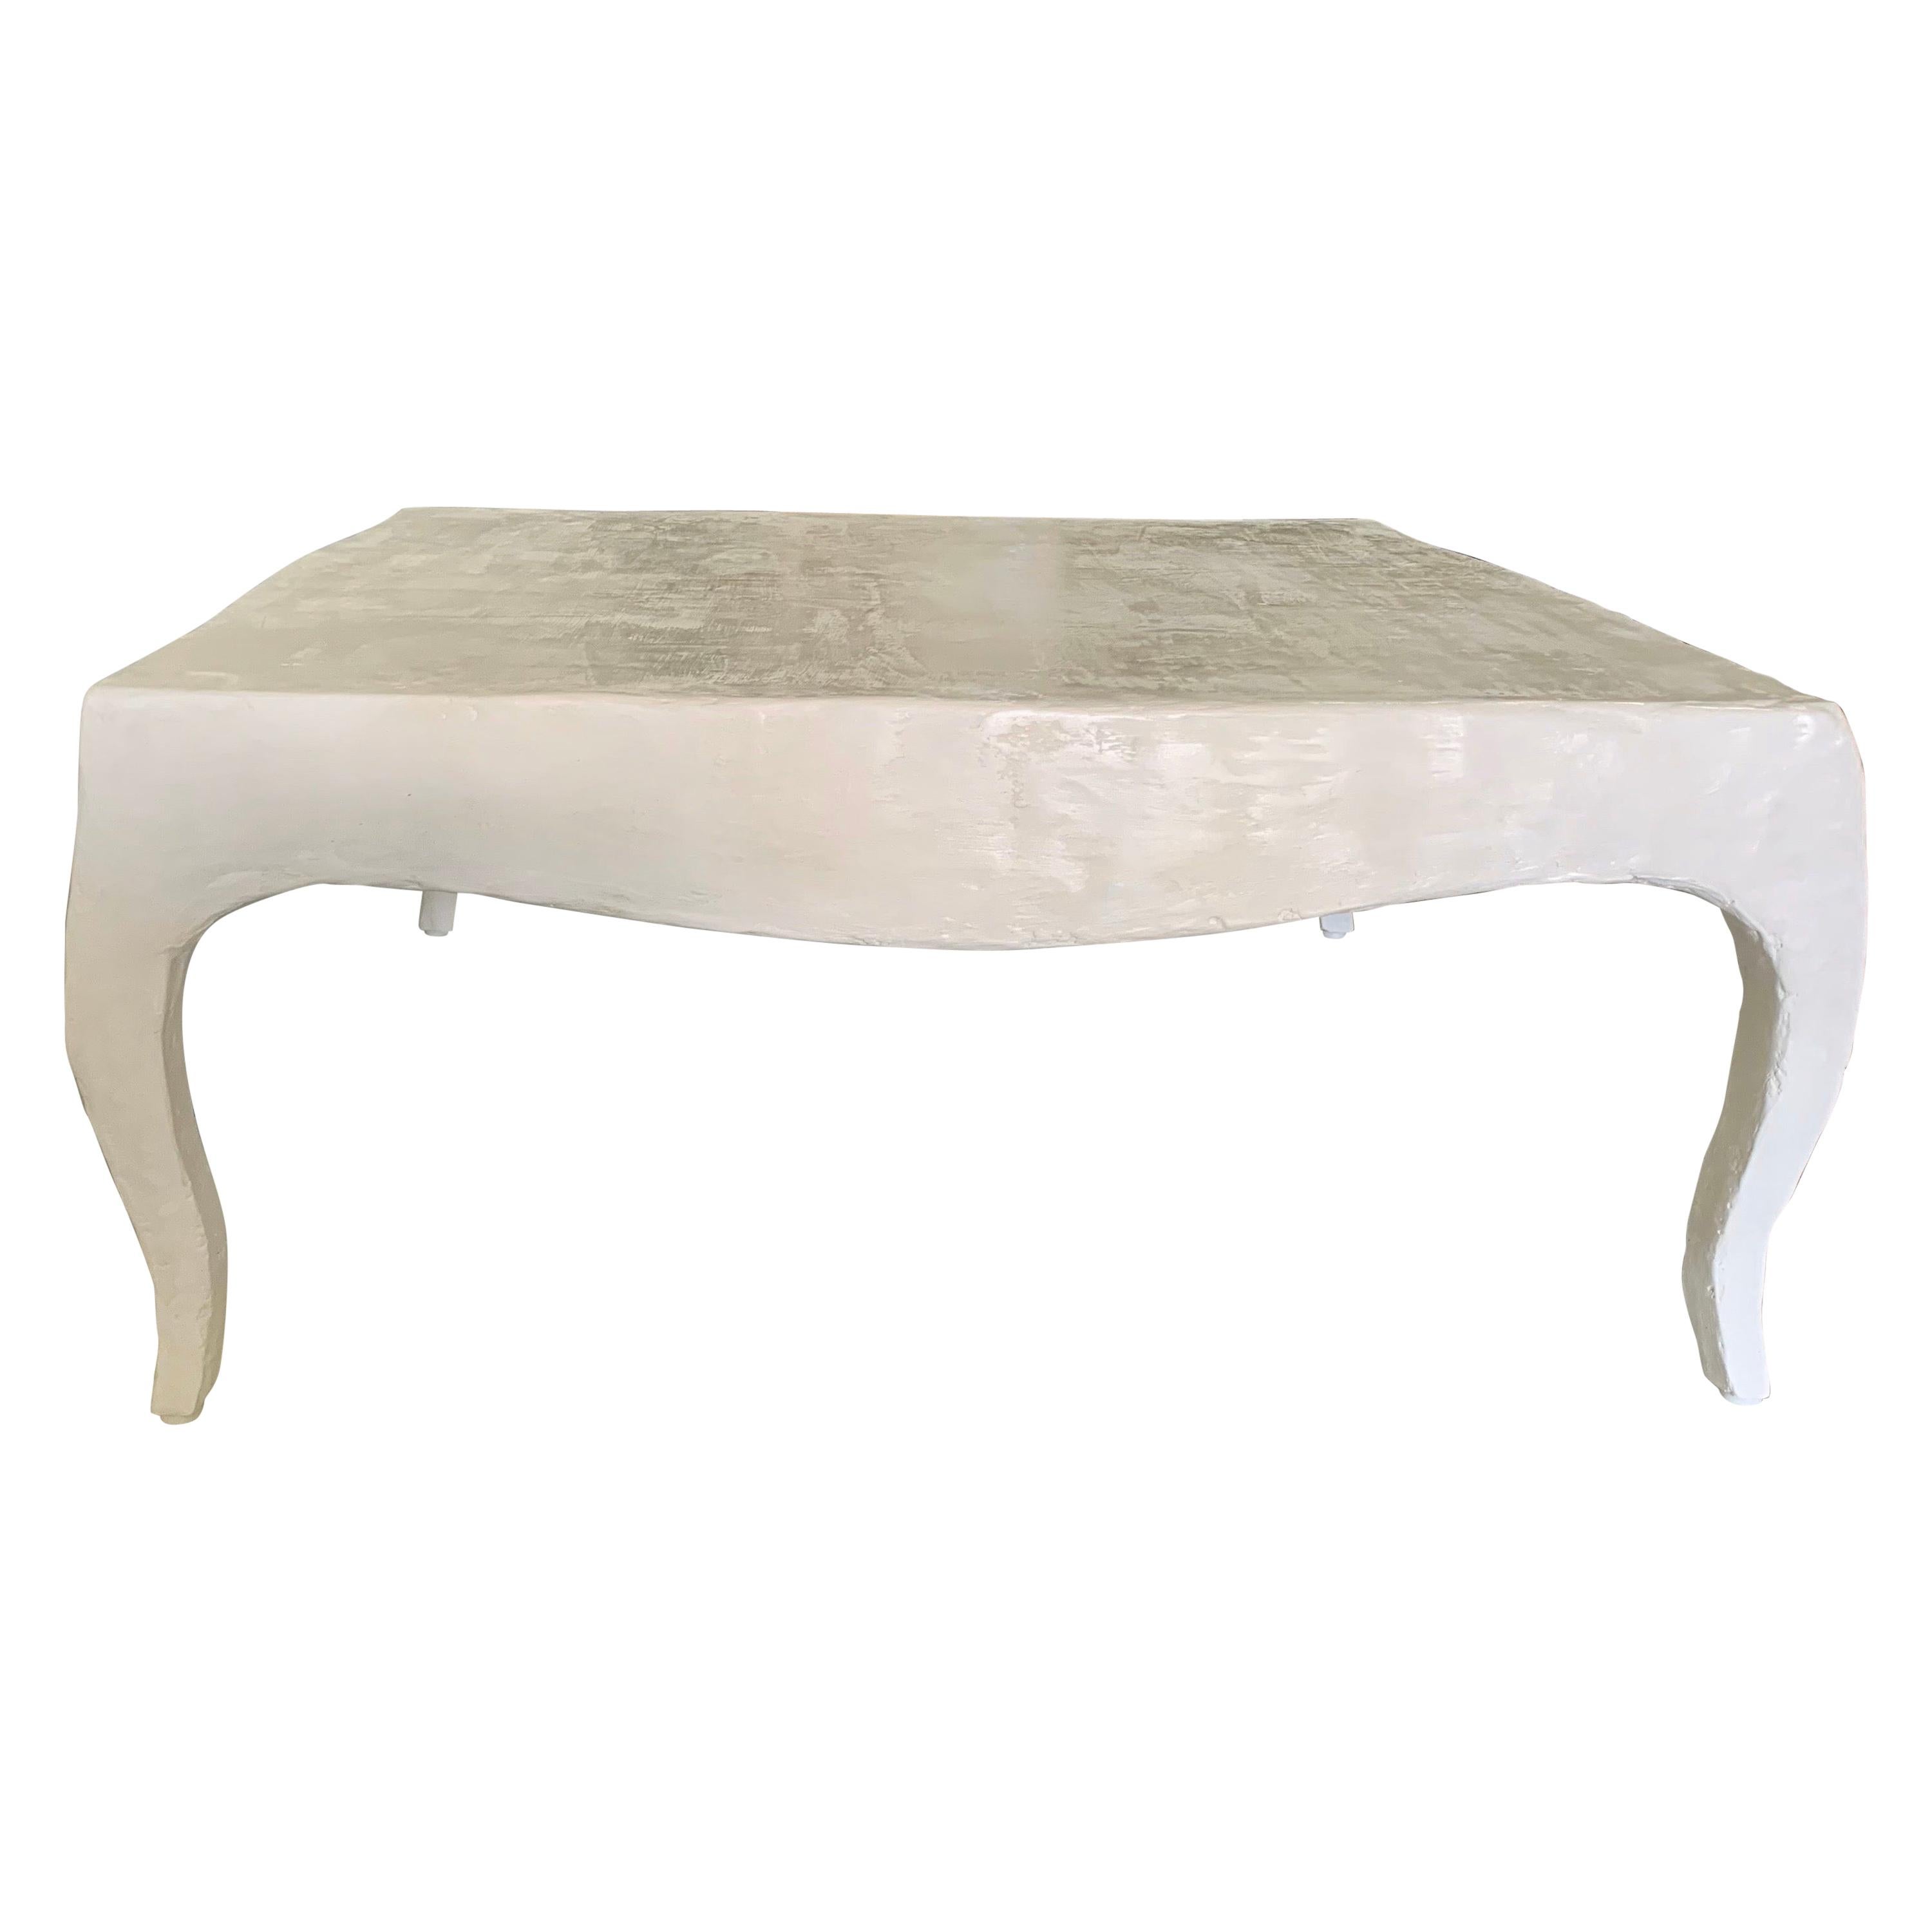 Elegant French Plaster Textured Cocktail Table with Cabriolet Legs,